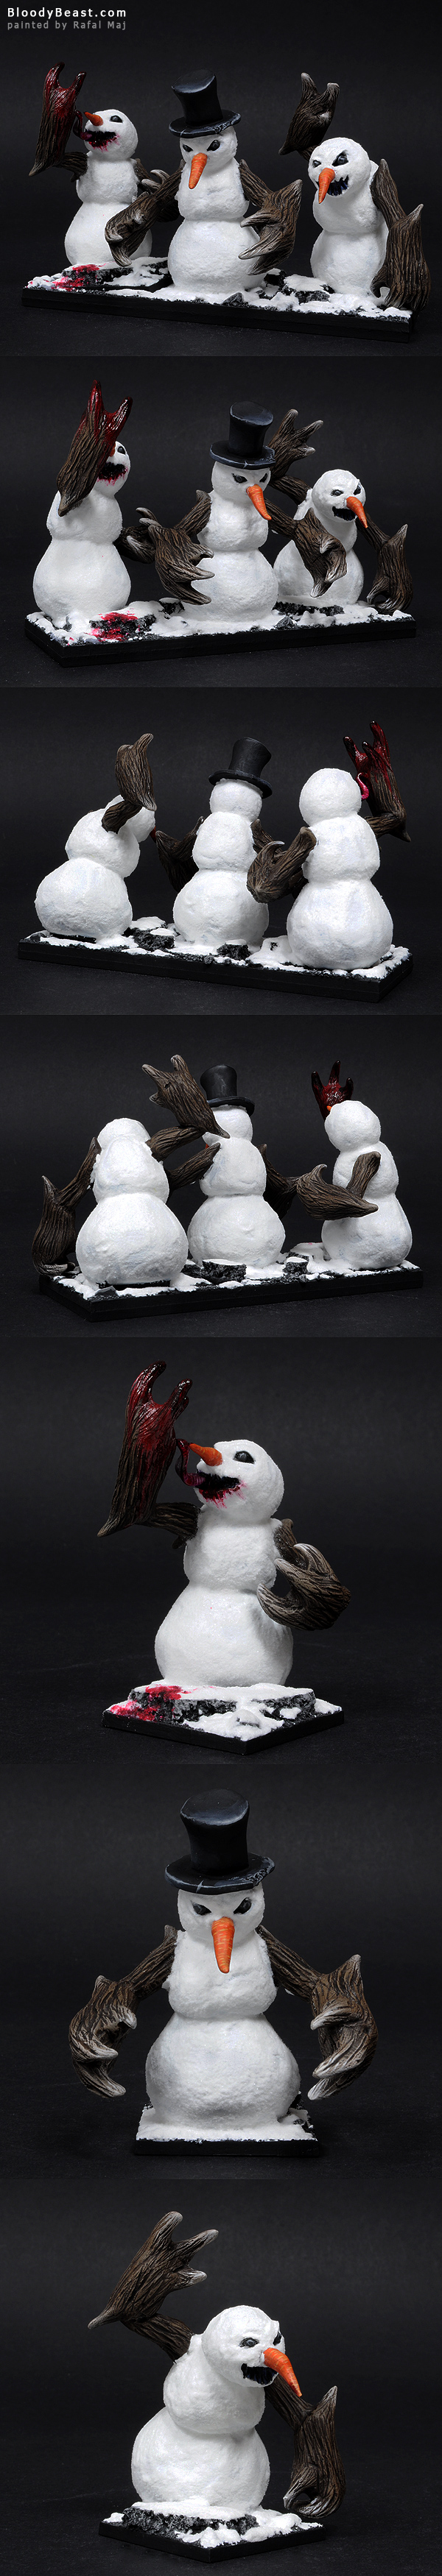 Evil Snowmen sculpted and painted by Rafal Maj (BloodyBeast.com)